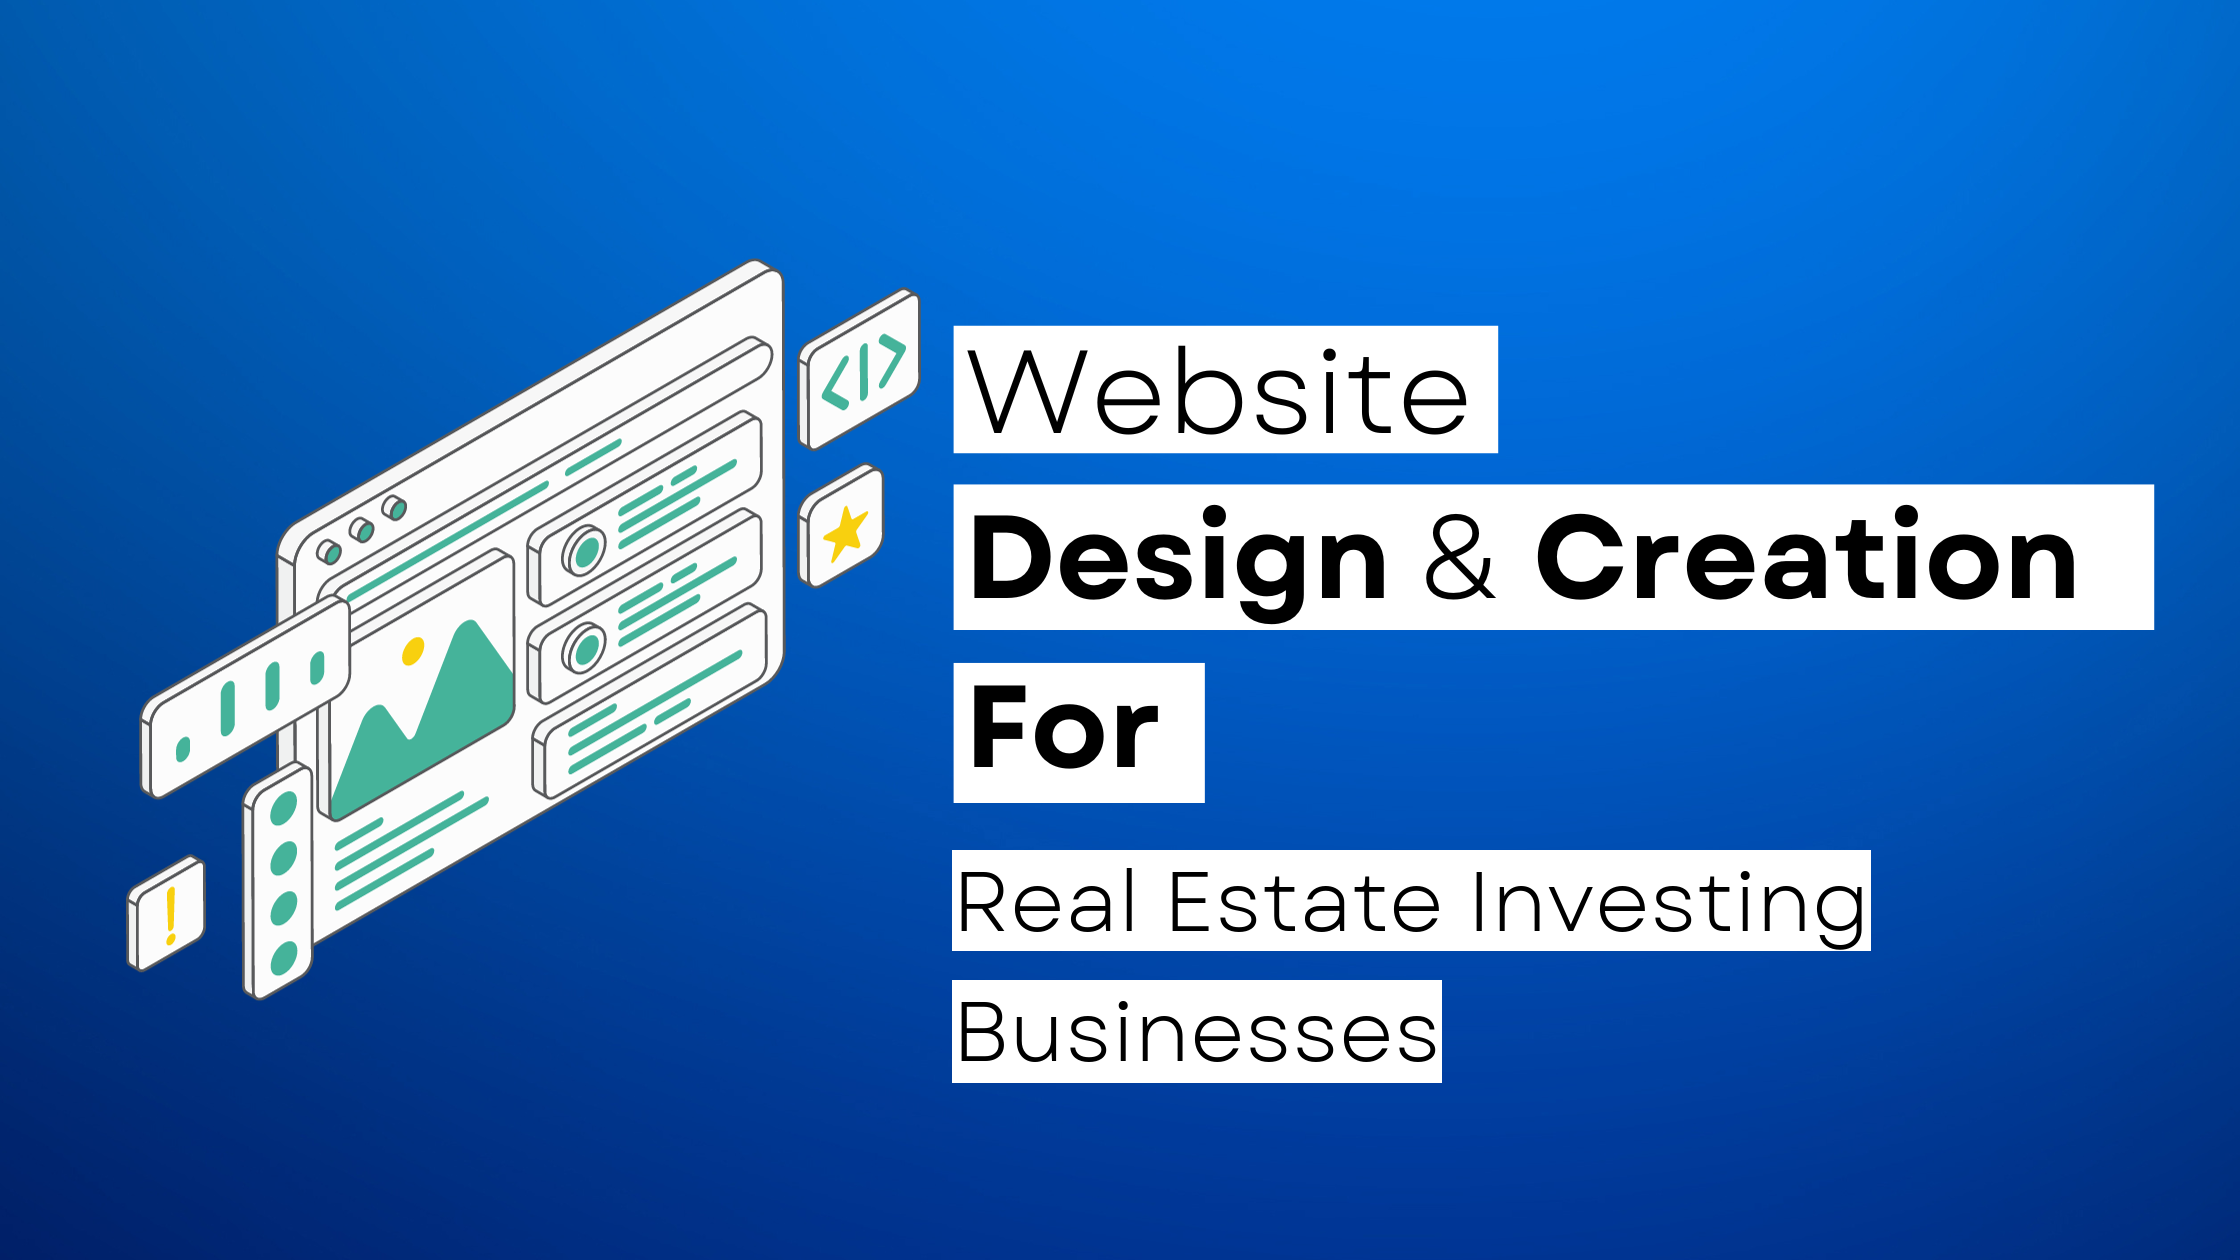 How to start a Real Estate Investing website